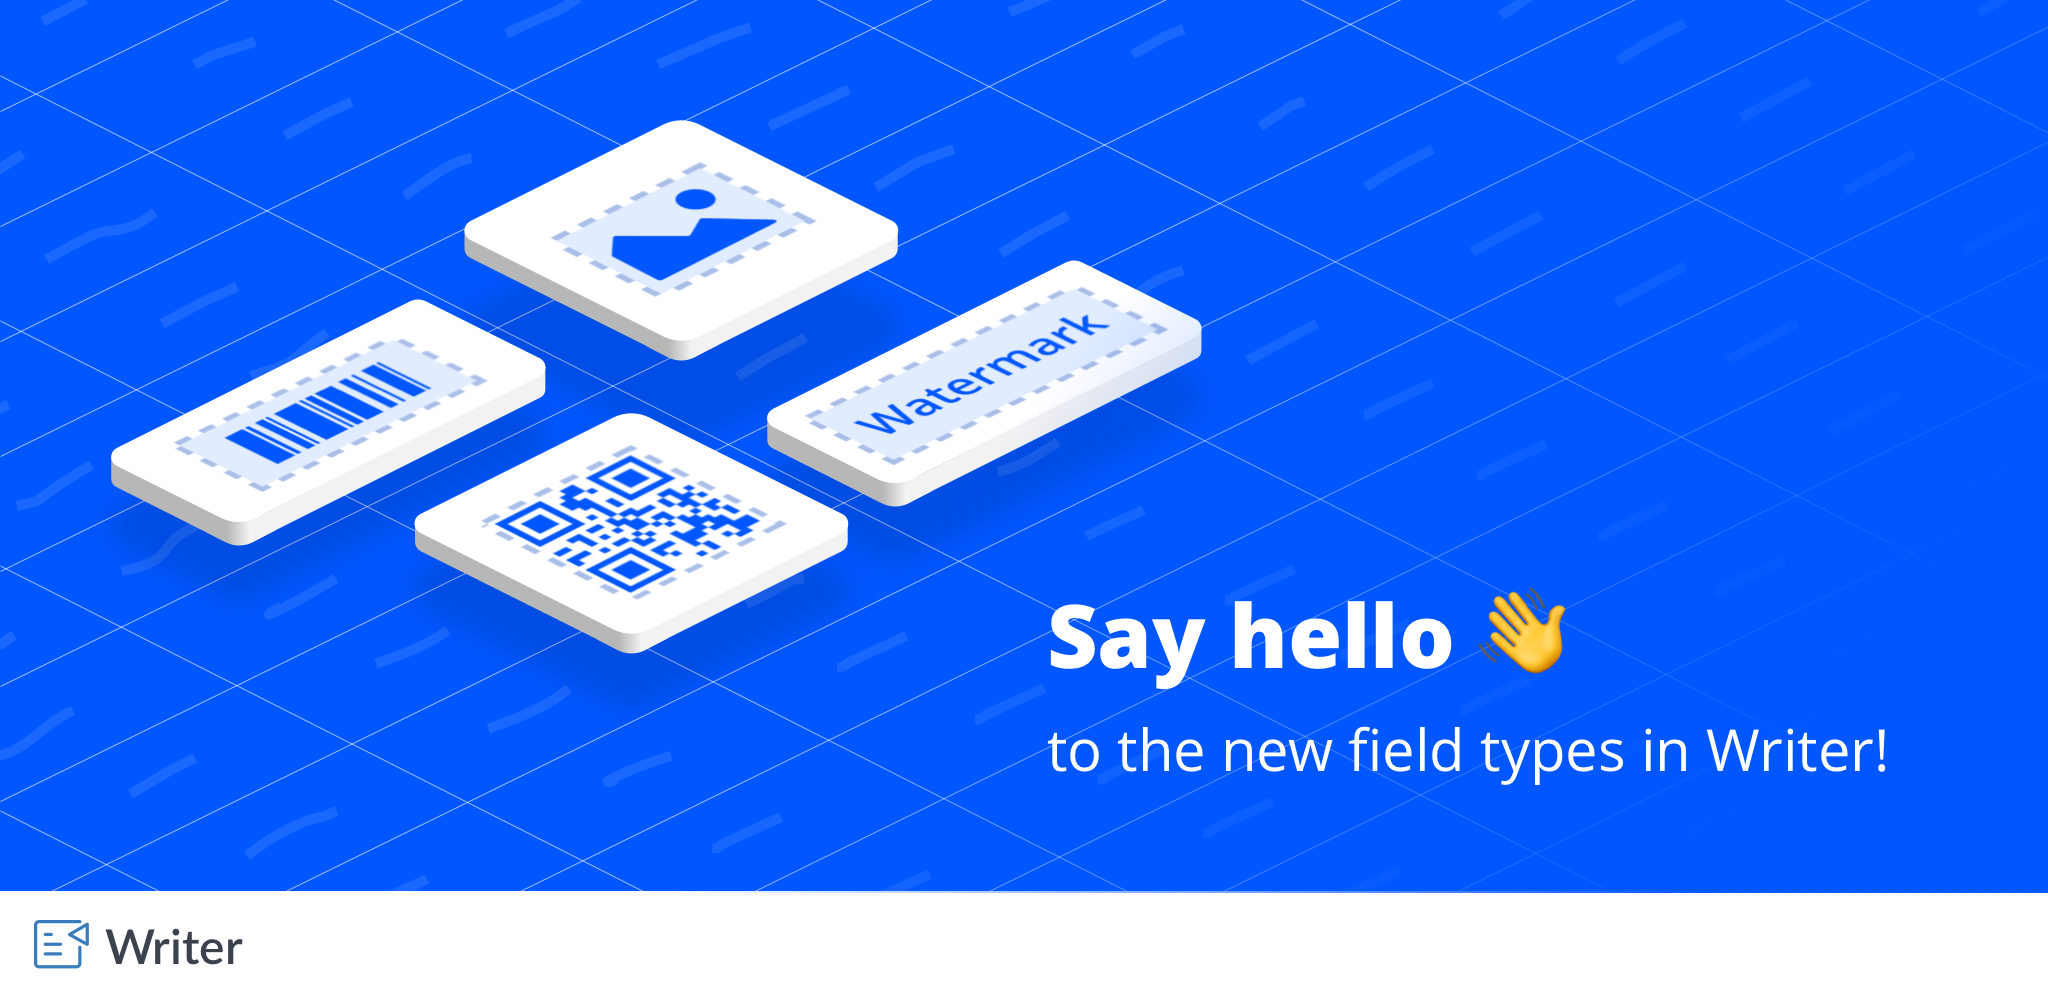 Introducing Writer's new merge fields: add QR Codes and more